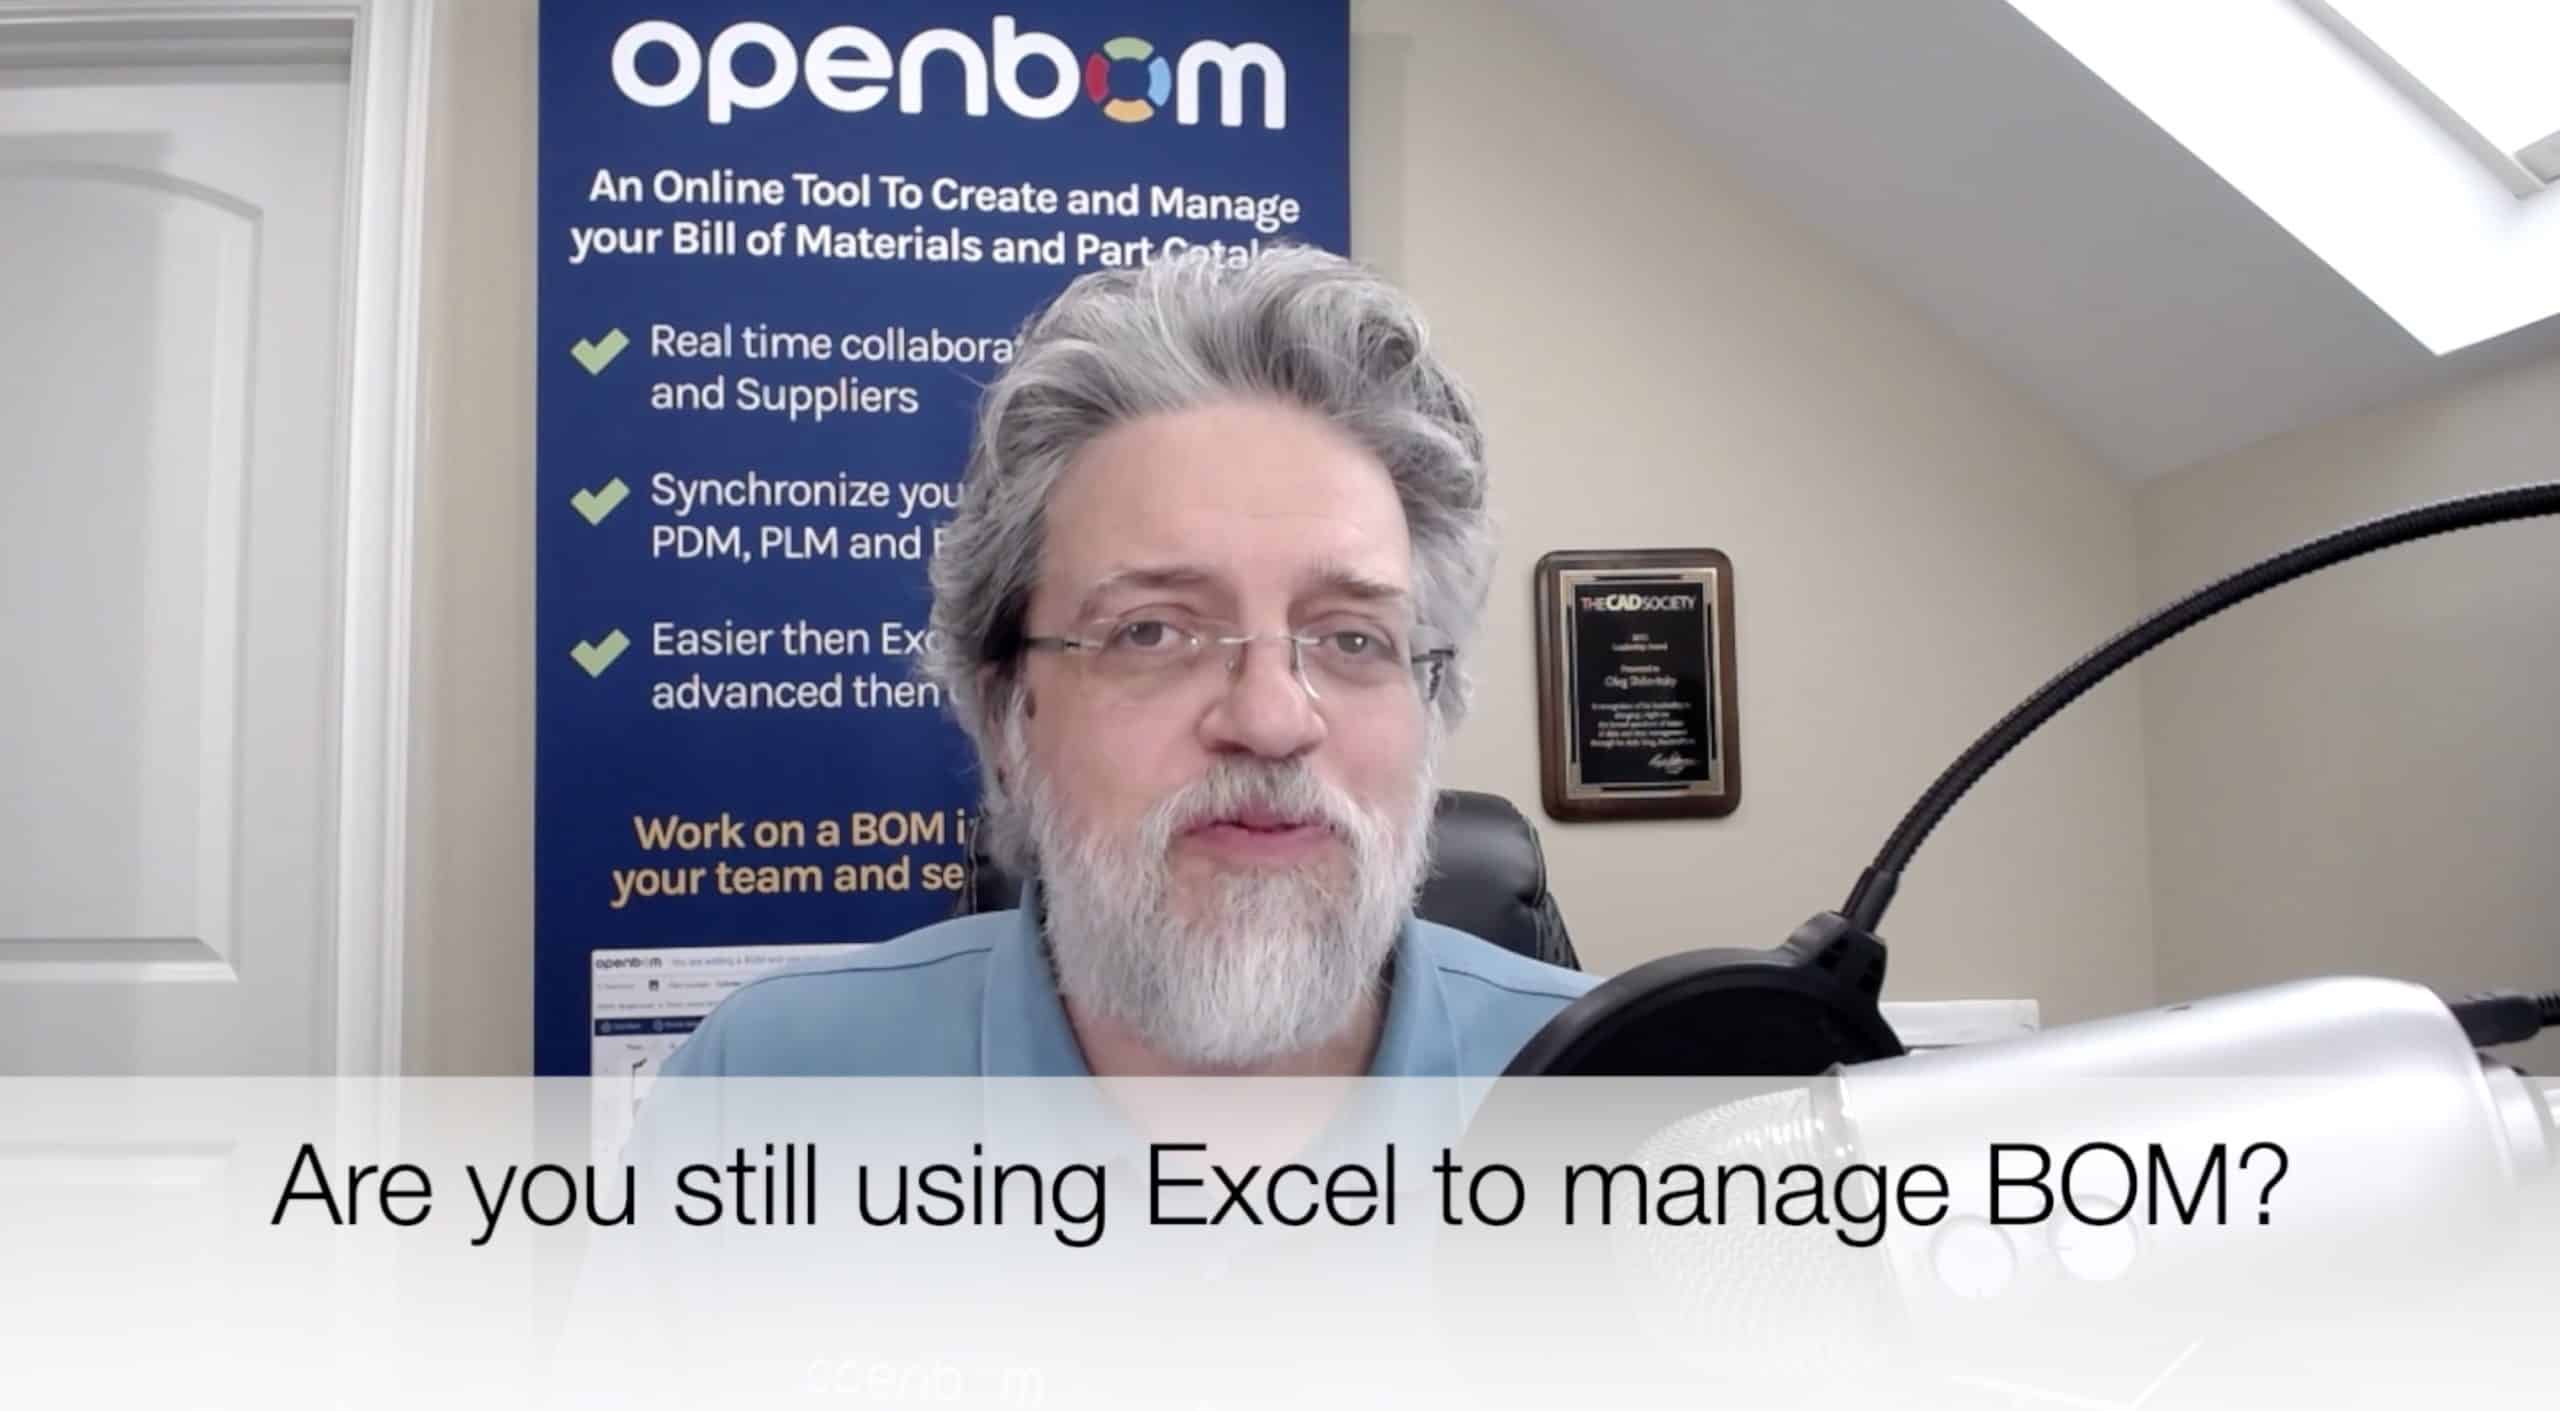 Are you still using Excel to manage BOMs? These are 5 things about OpenBOM that will make you stop using Excel today.